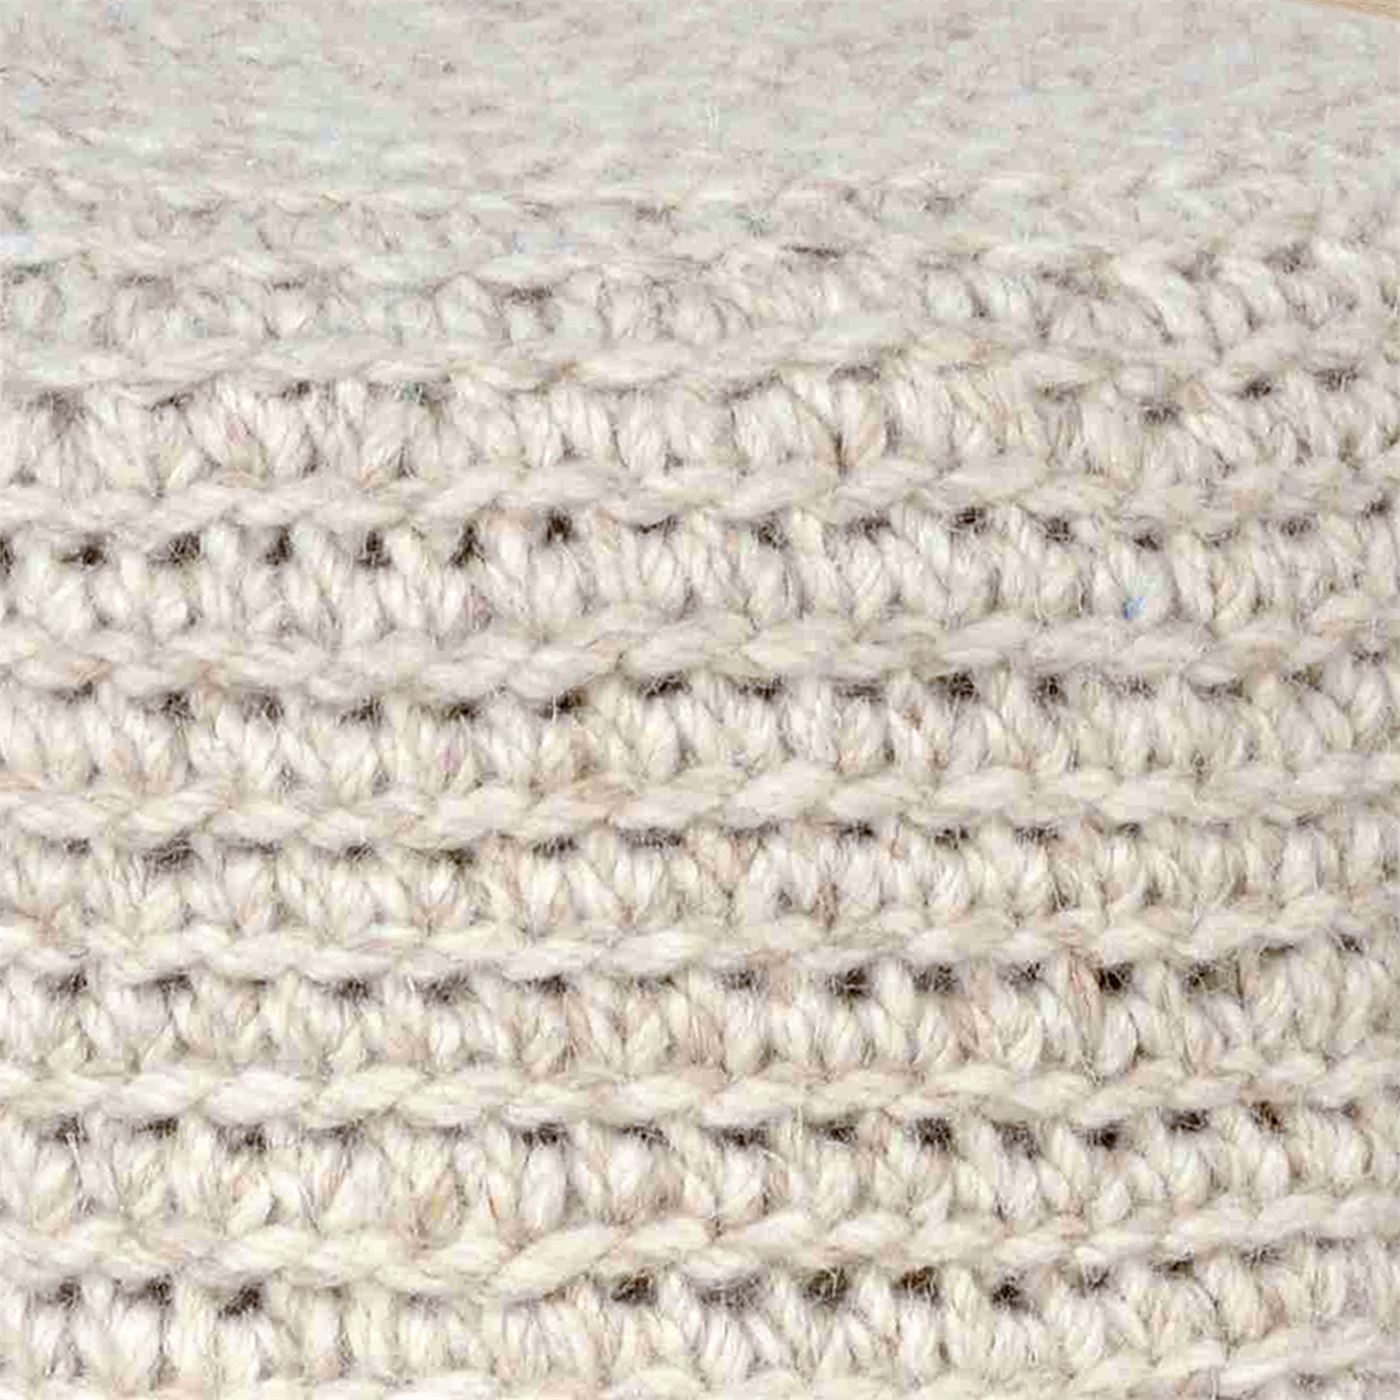 Montana Round Stool, Wool, Natural White, Hm Knitted, Flat Weave 